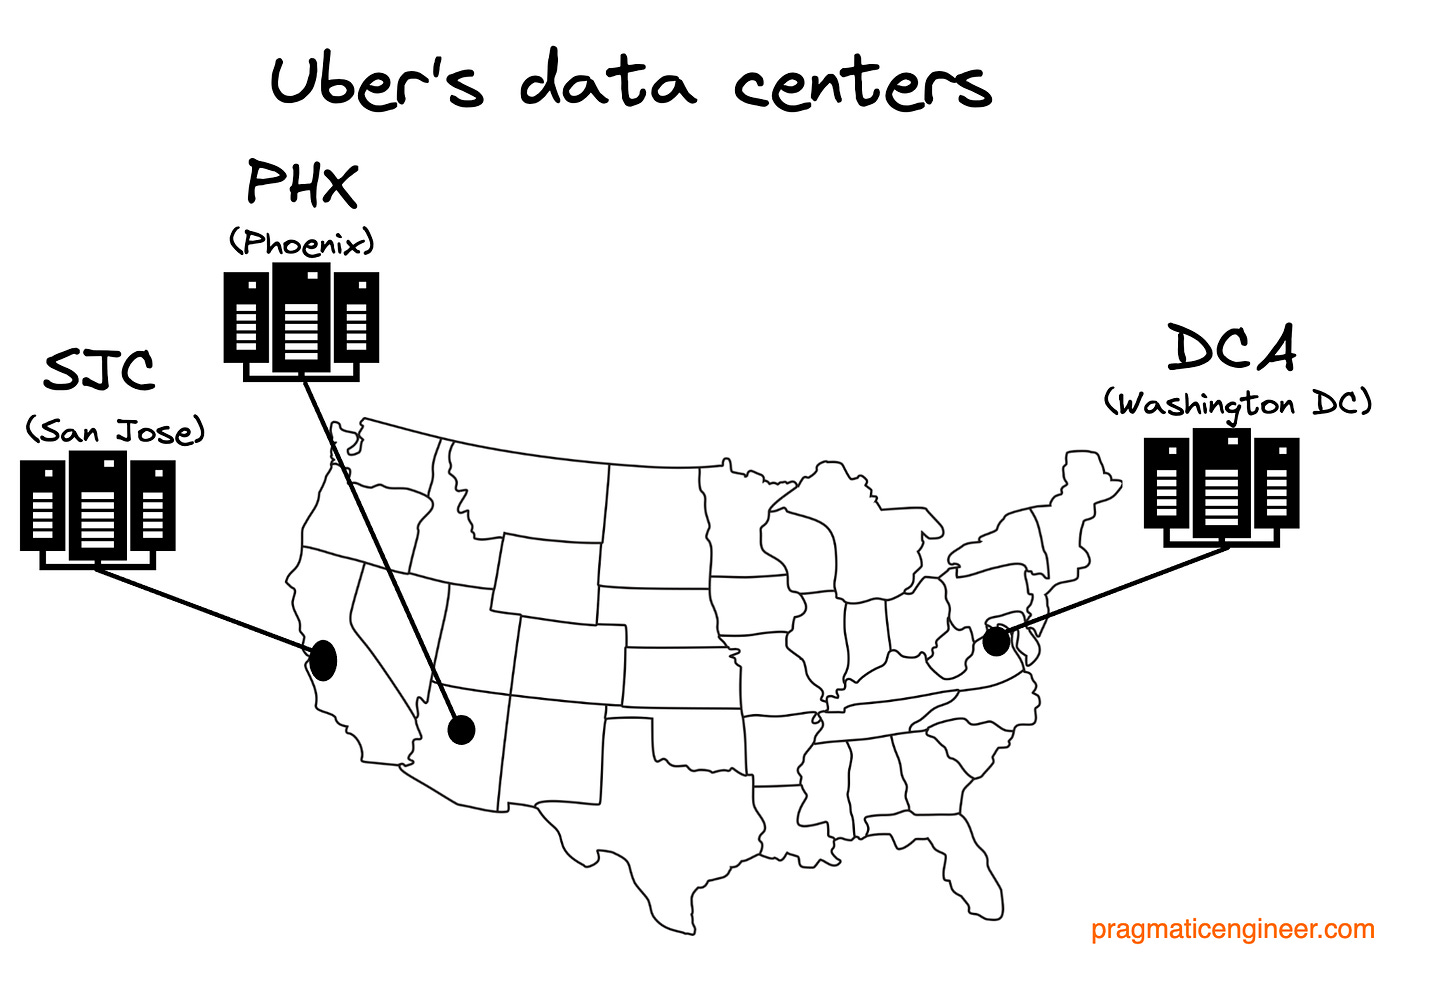 The locations of Uber’s three data centers